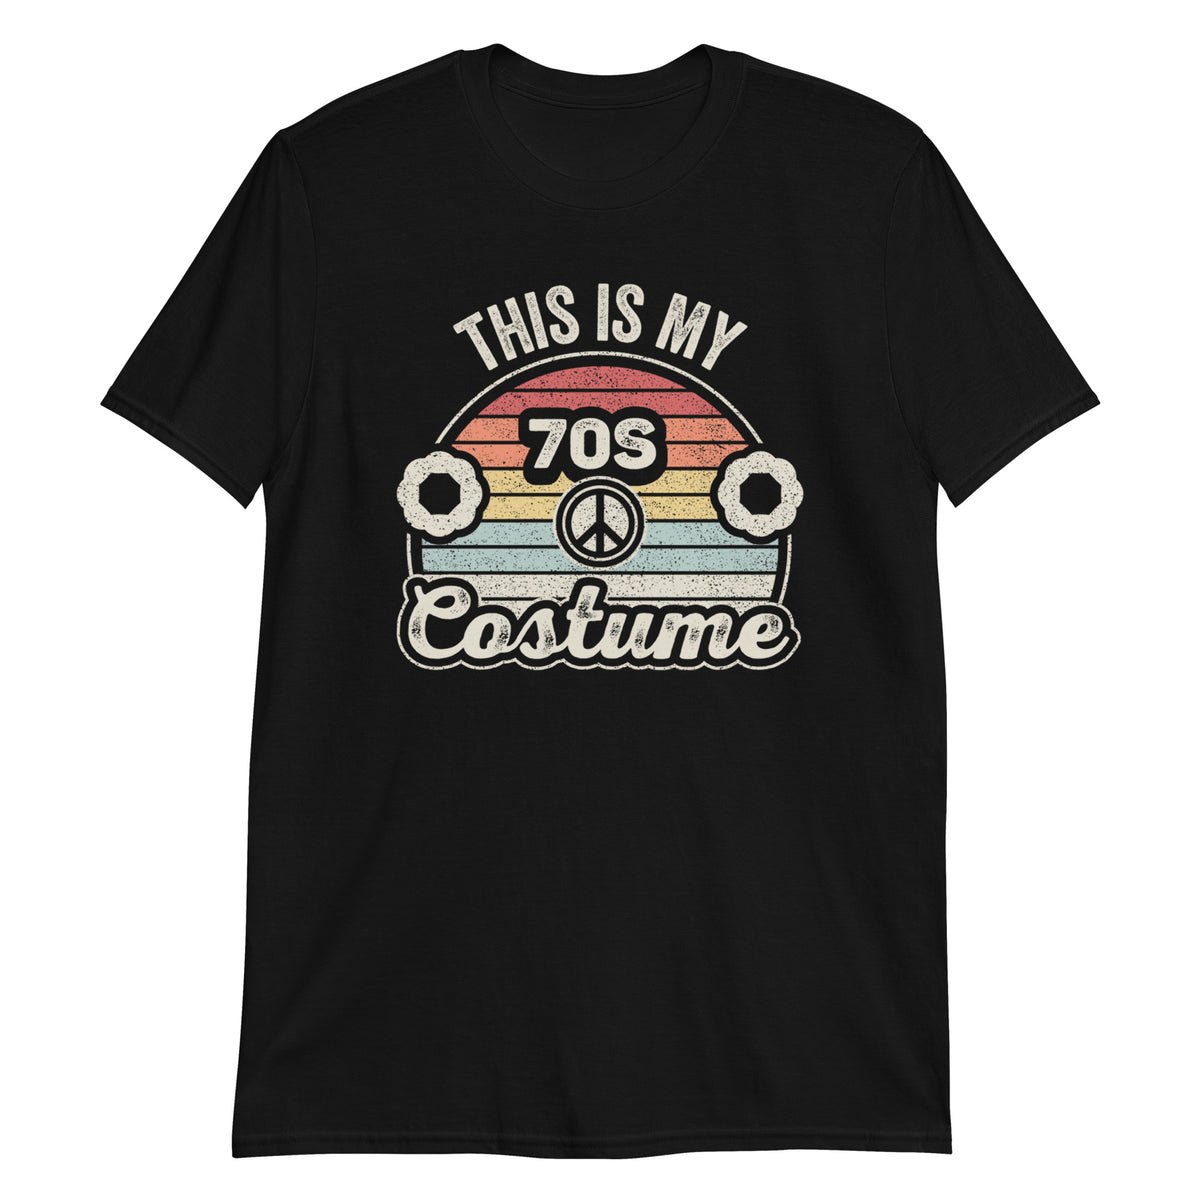 This is MY 70s Costume T-Shirt